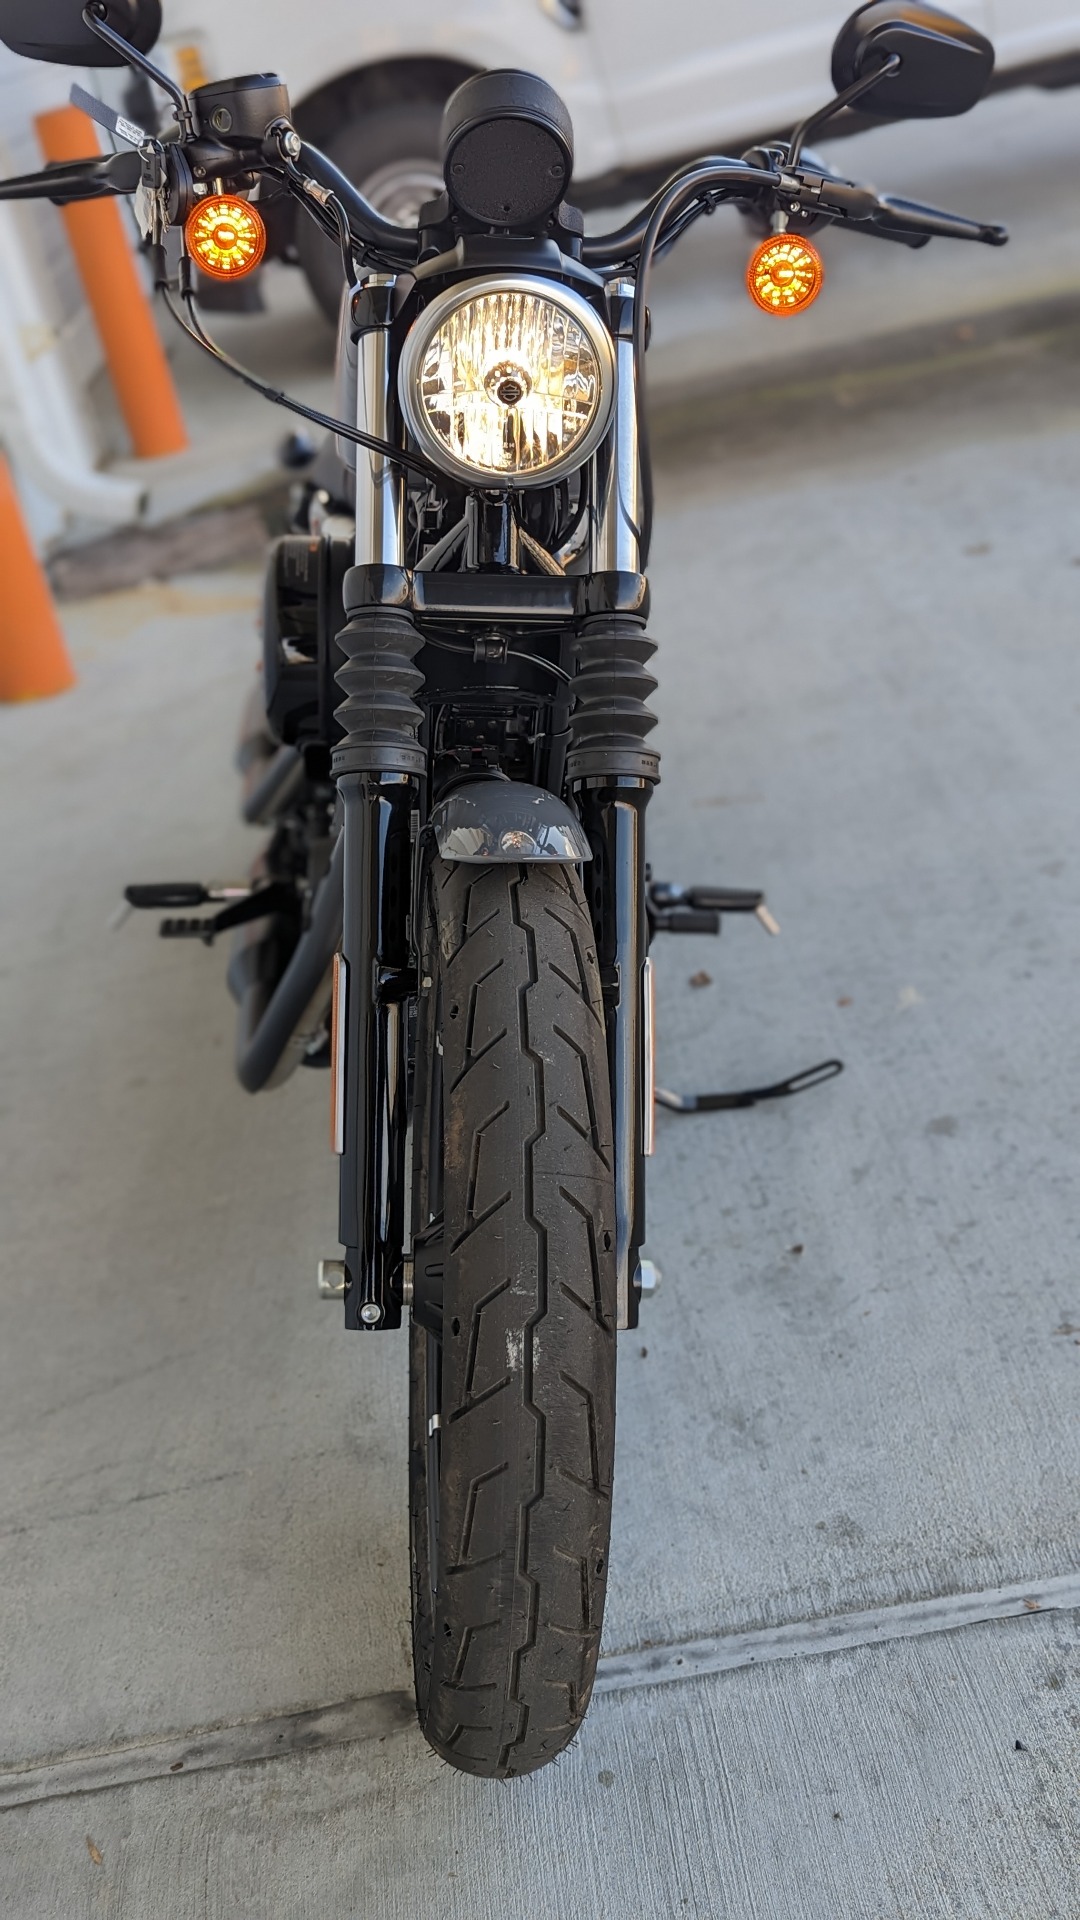 motorcycles for sale in dallas area - Photo 9